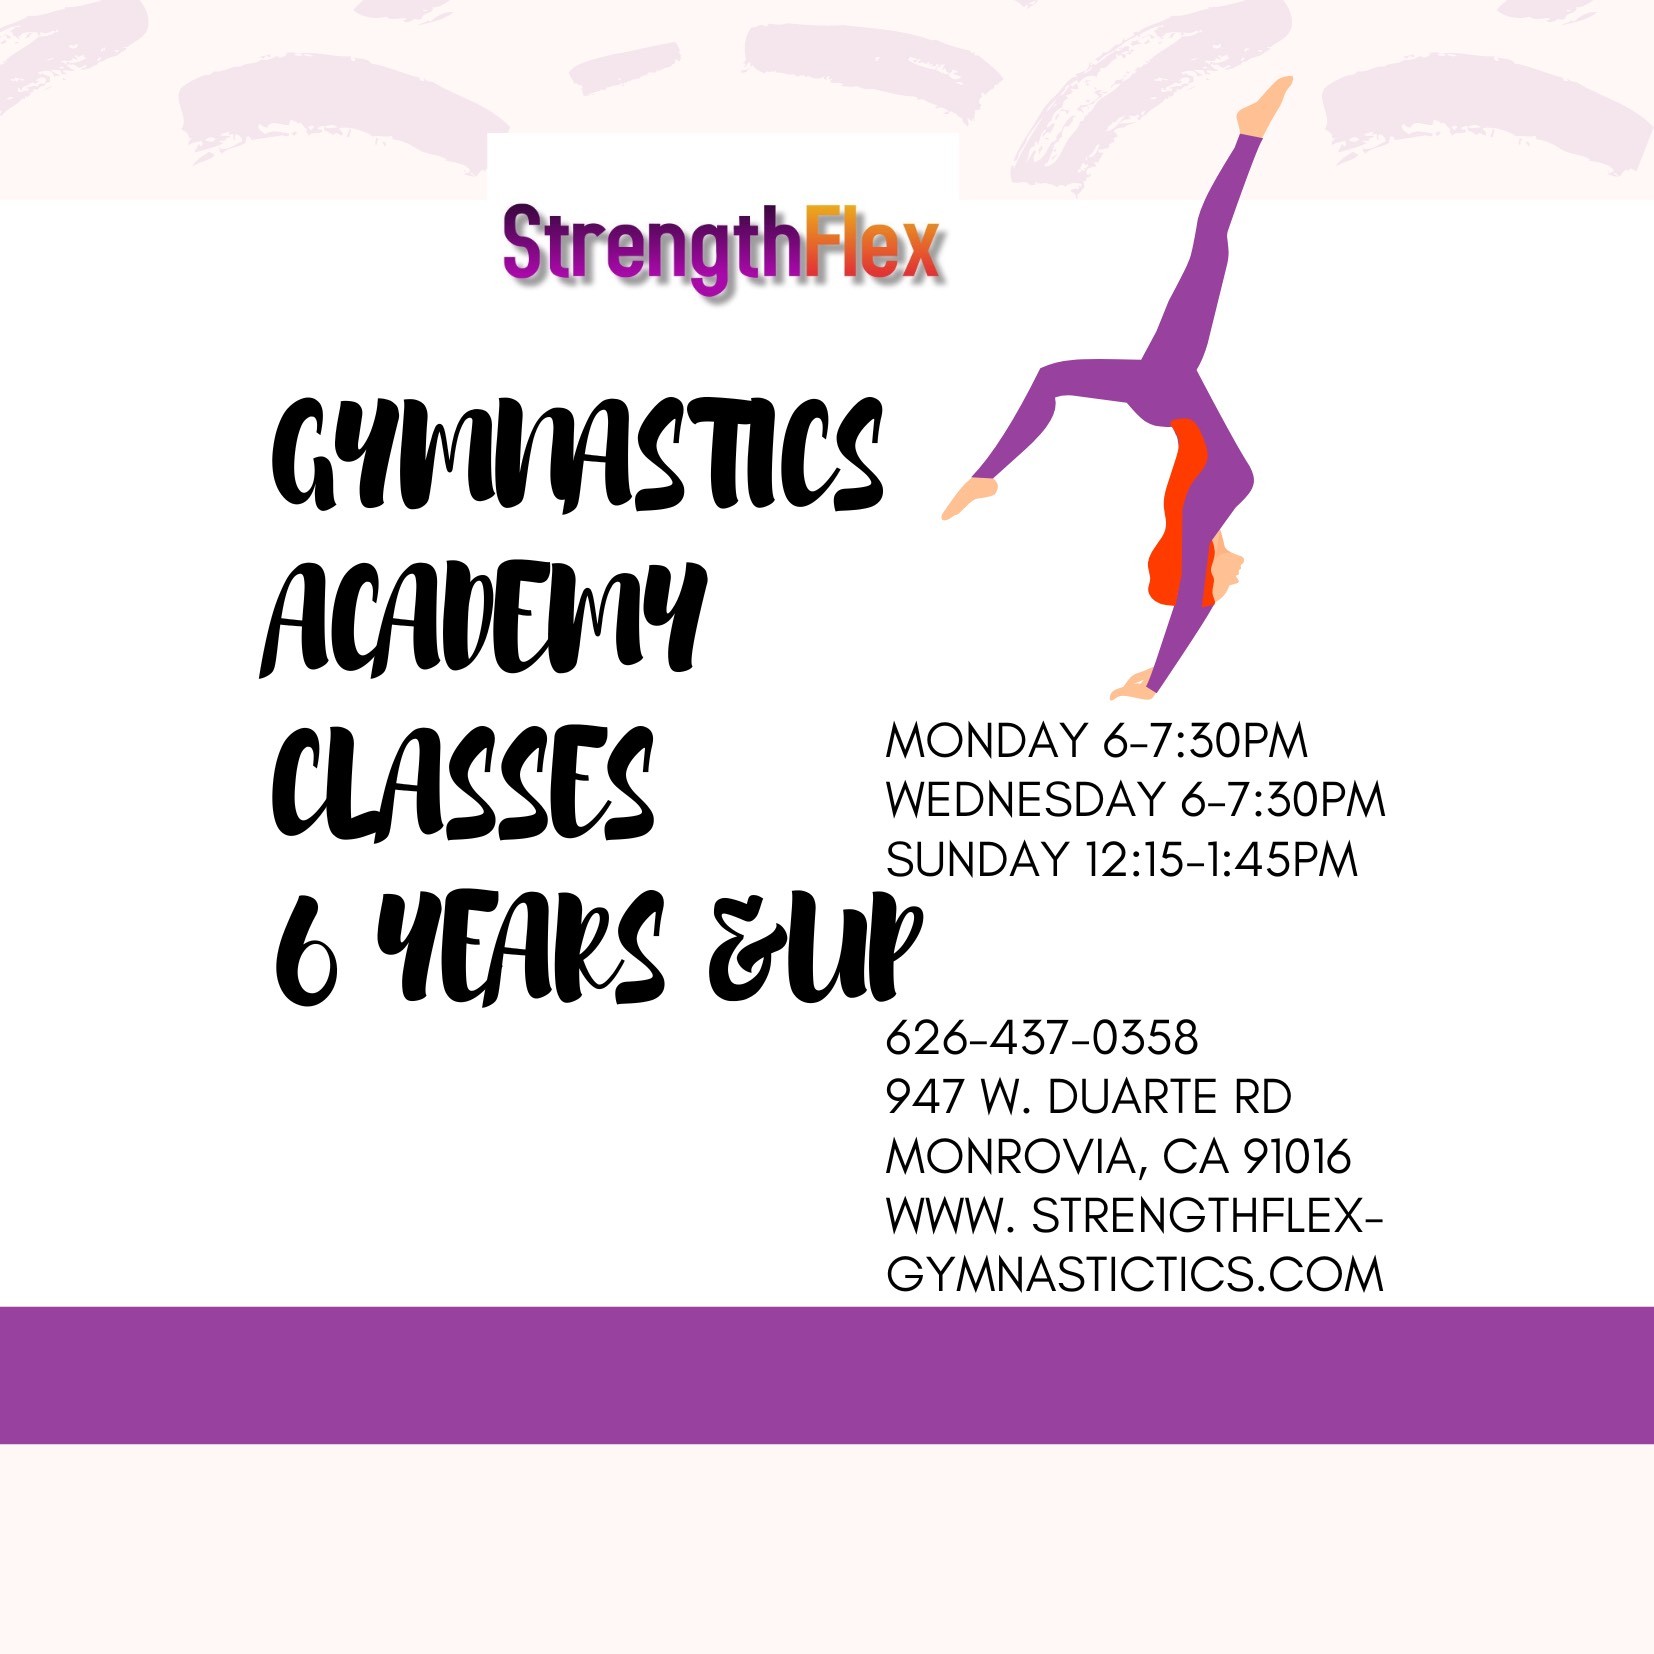 a flyer for Strengthflex Gymnastics Academy Classes for kids 6 years and up